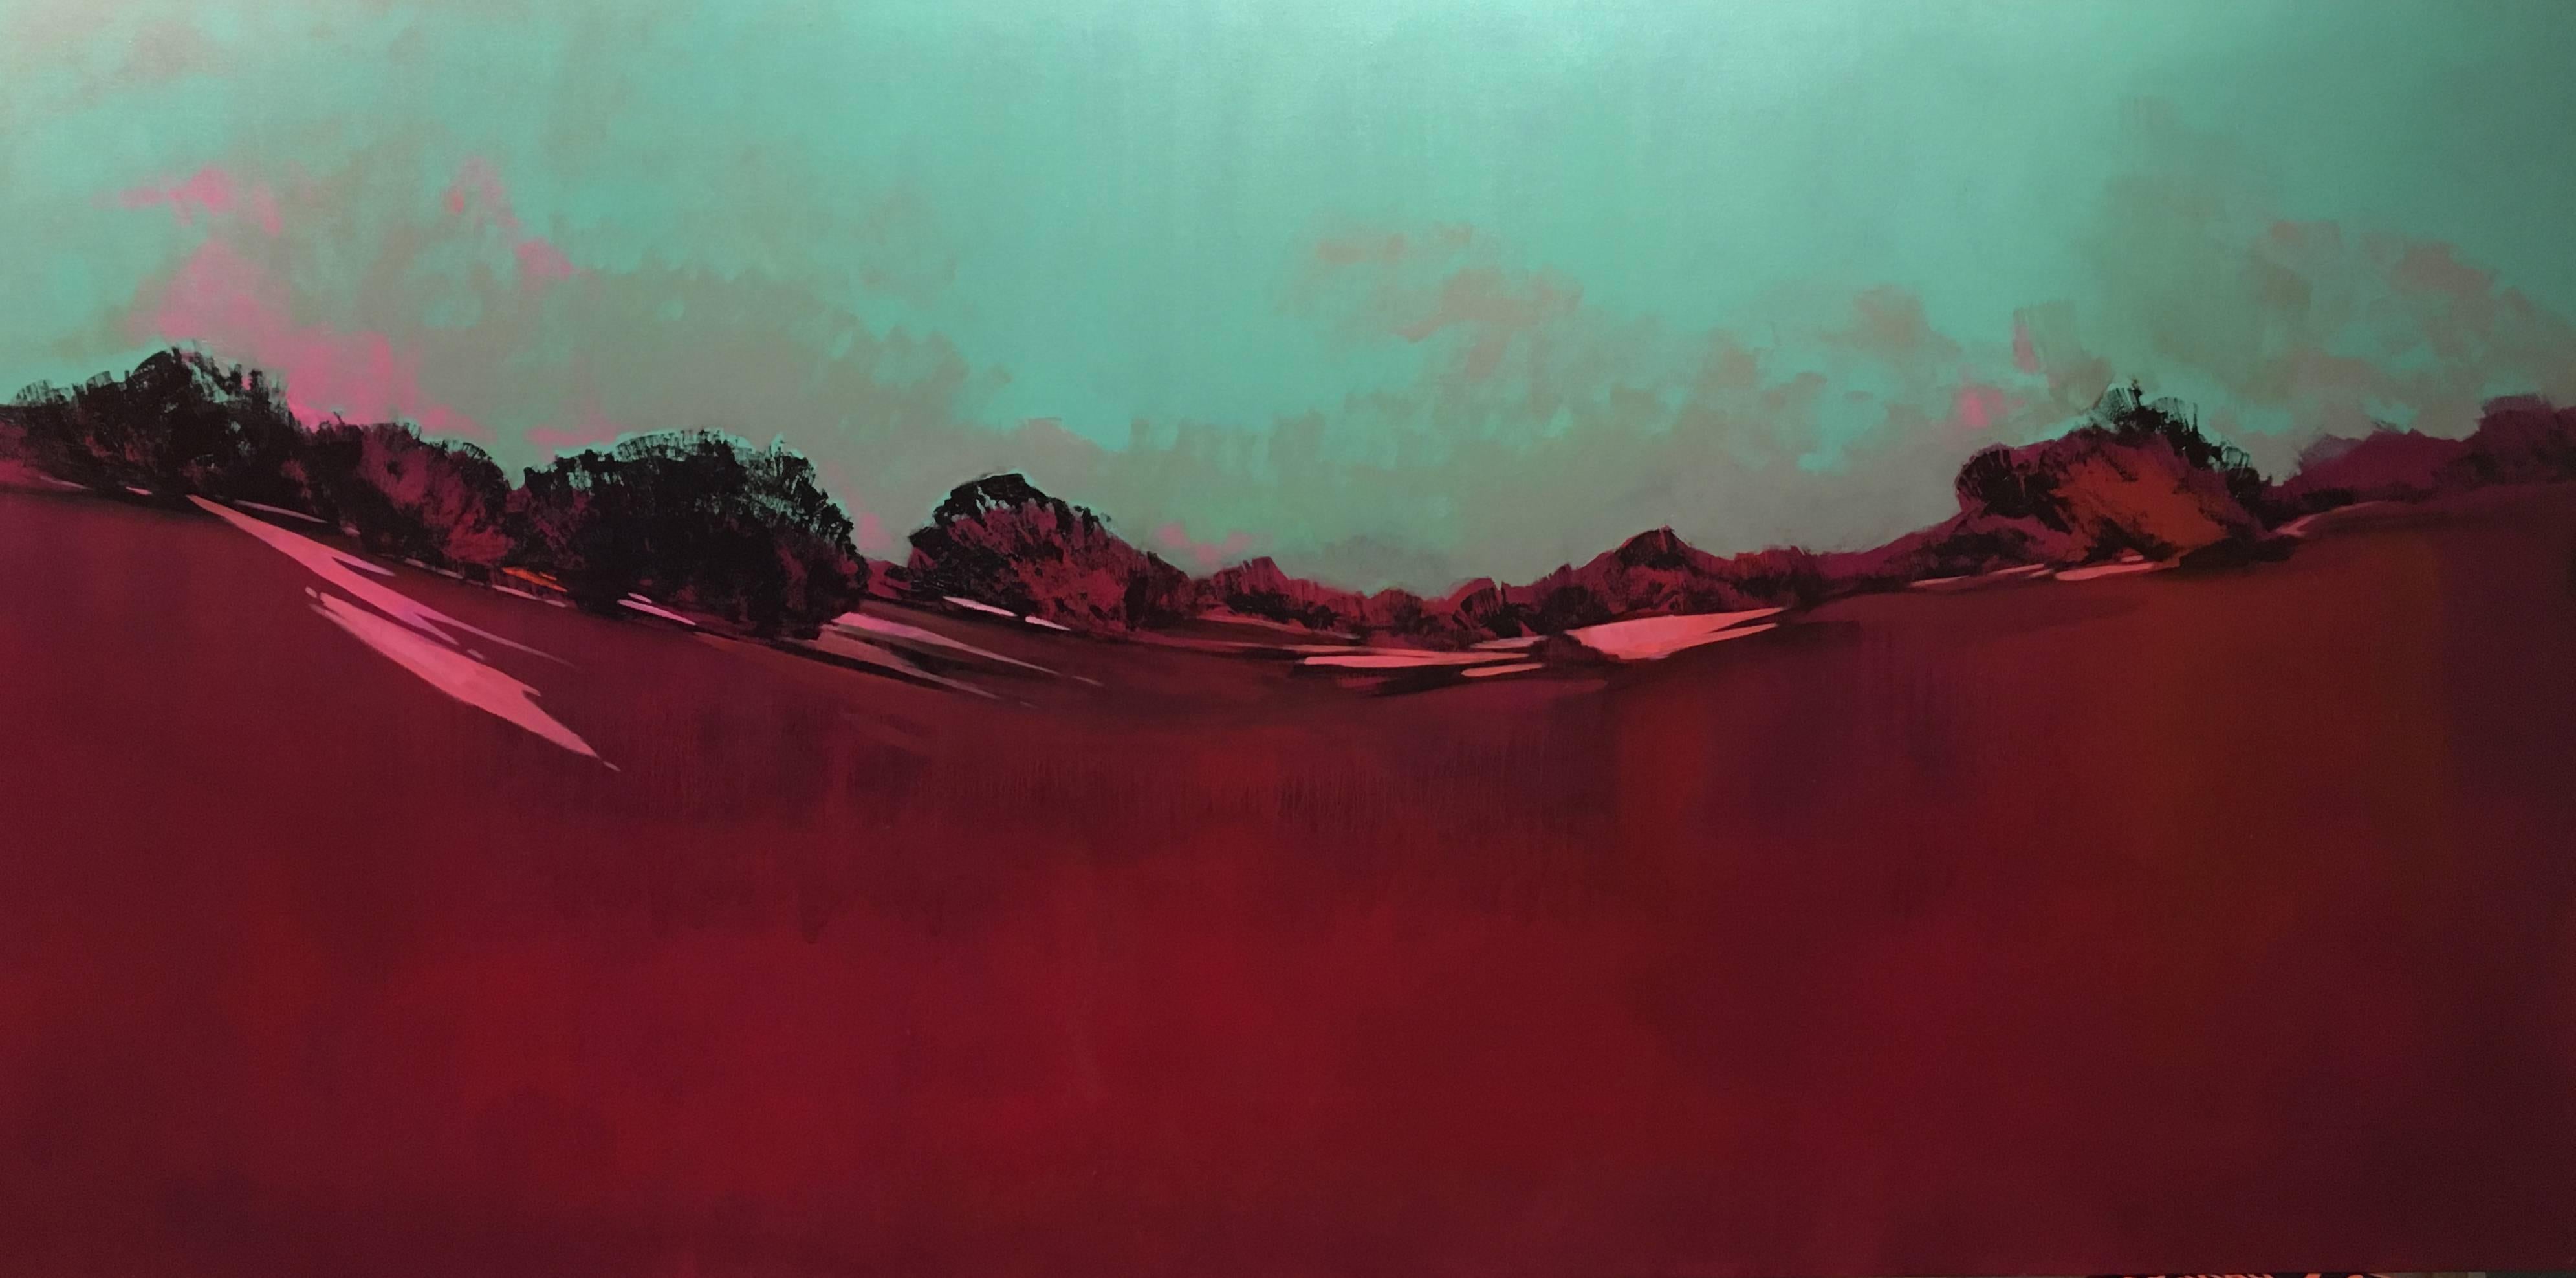 Geografia del color, Amanecer, pink and green abstract landscape, oil painting